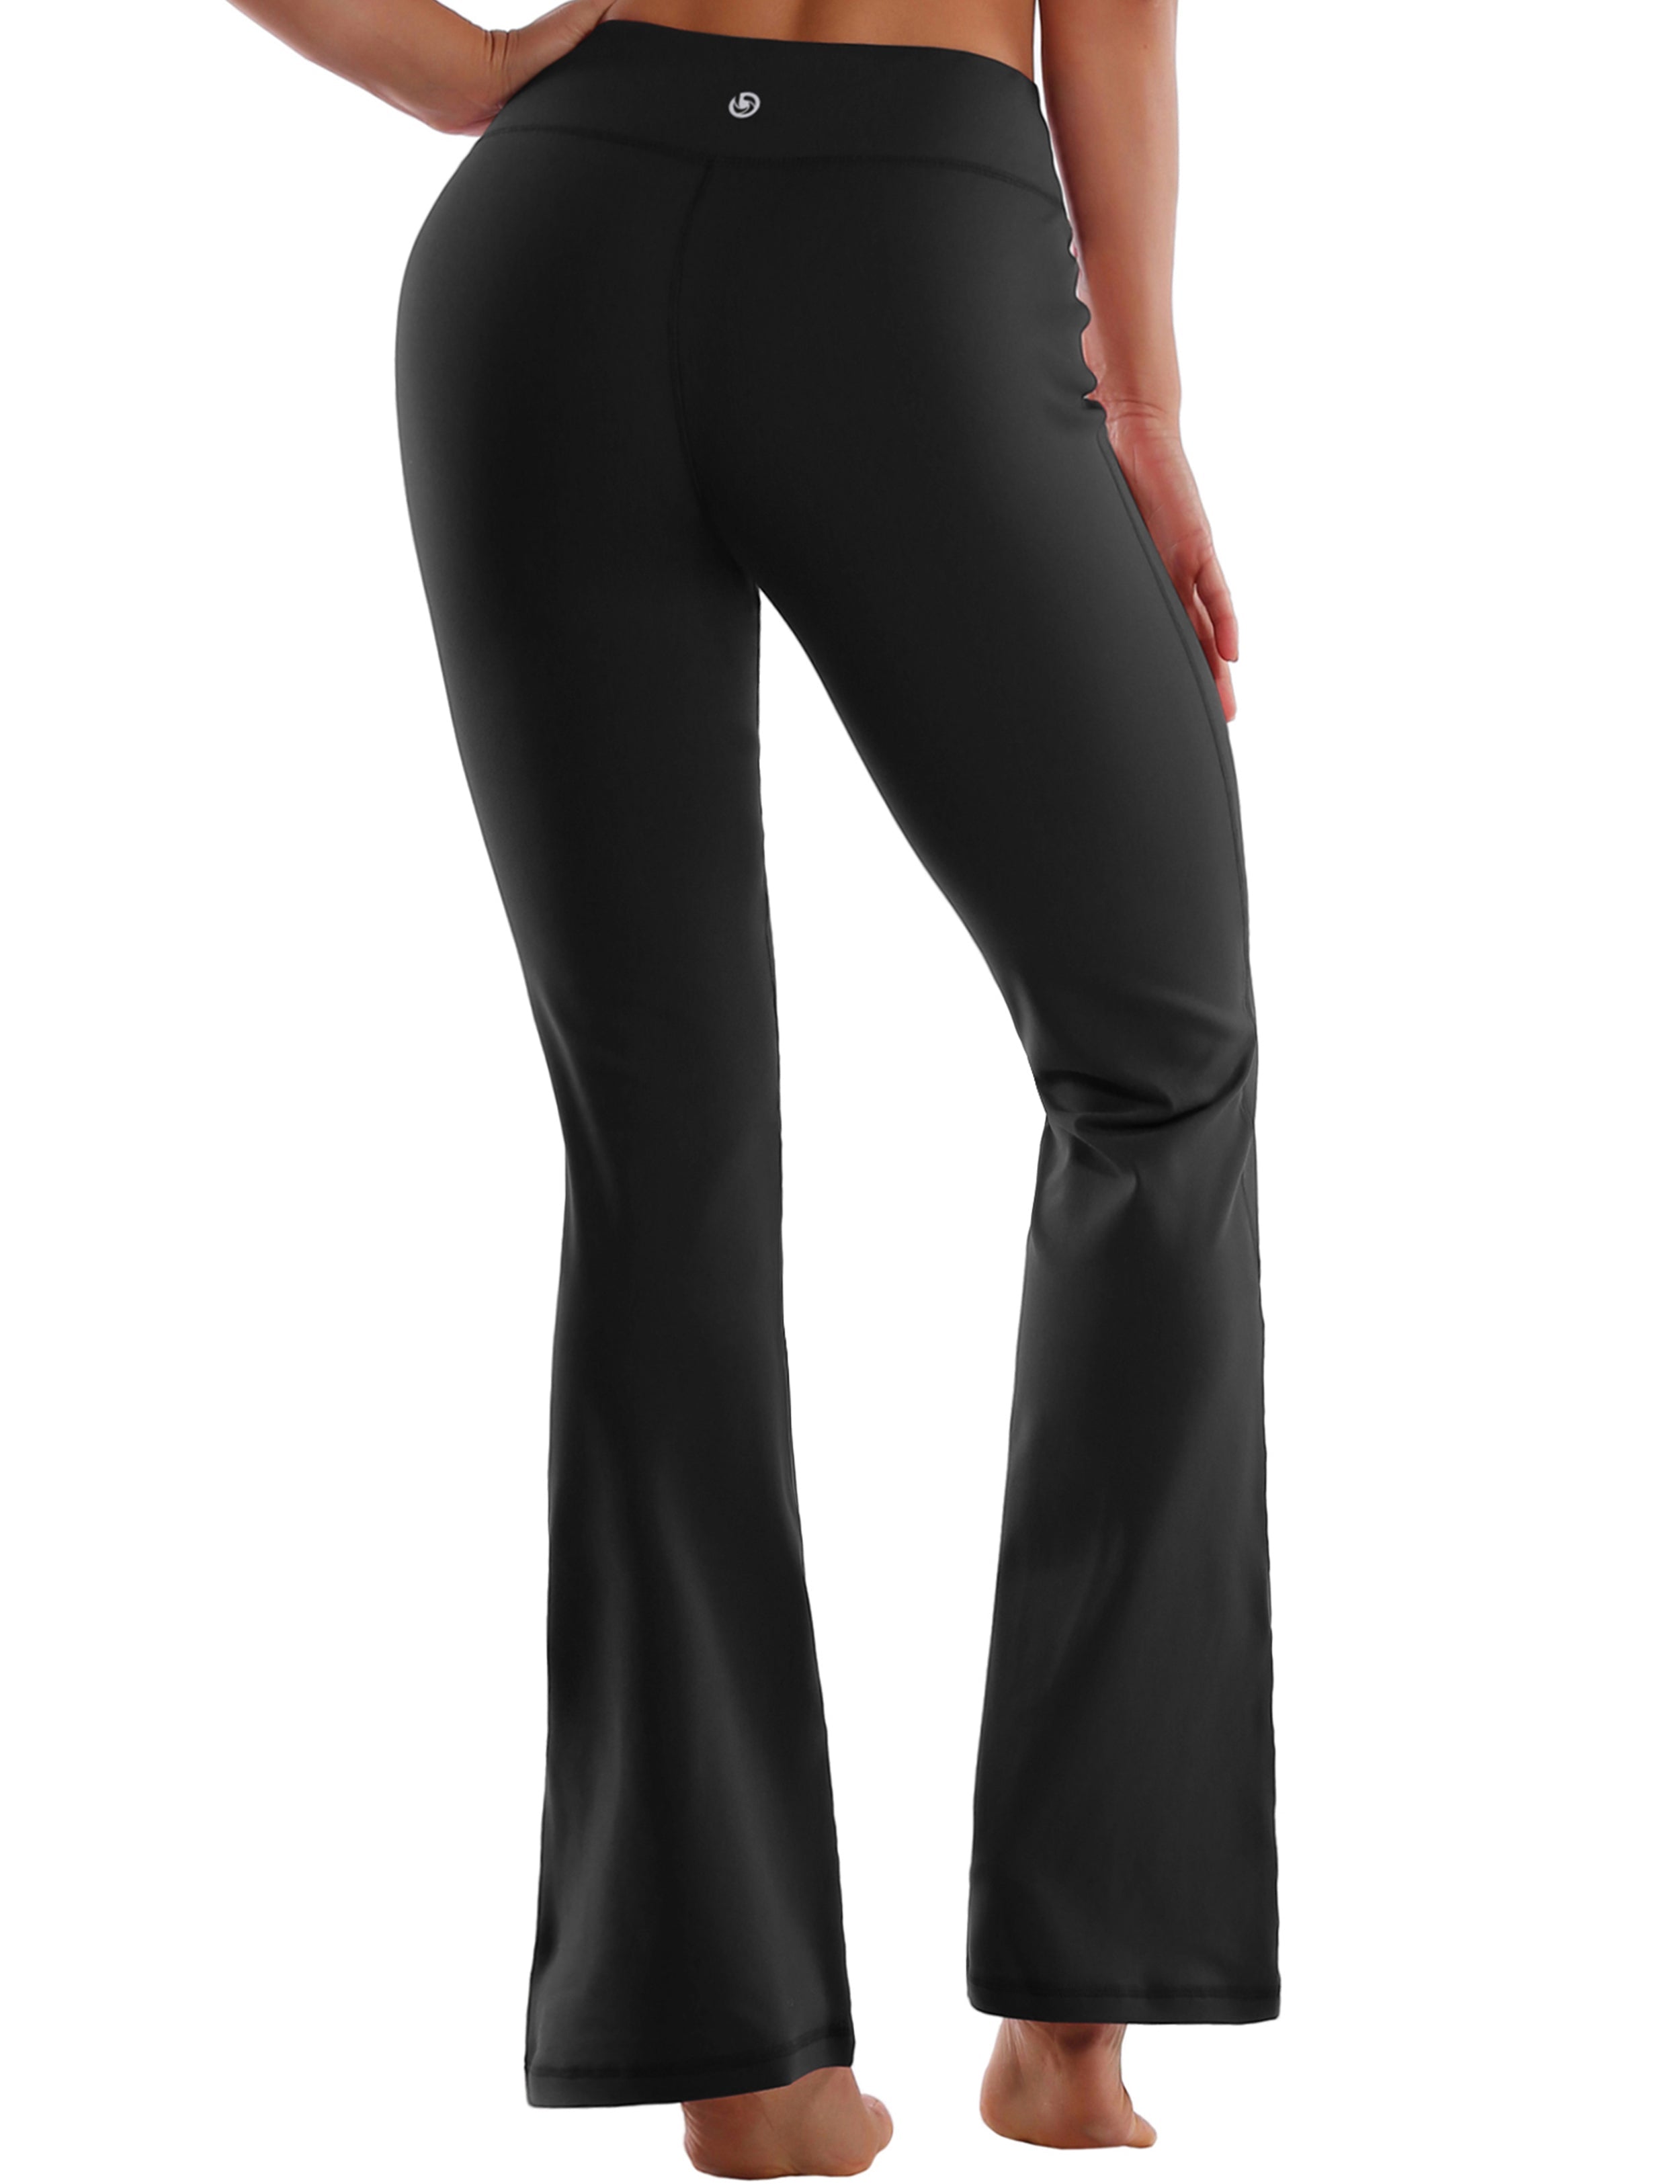 29 31 33 35 Bootcut Leggings with Pockets black ins_Pilates